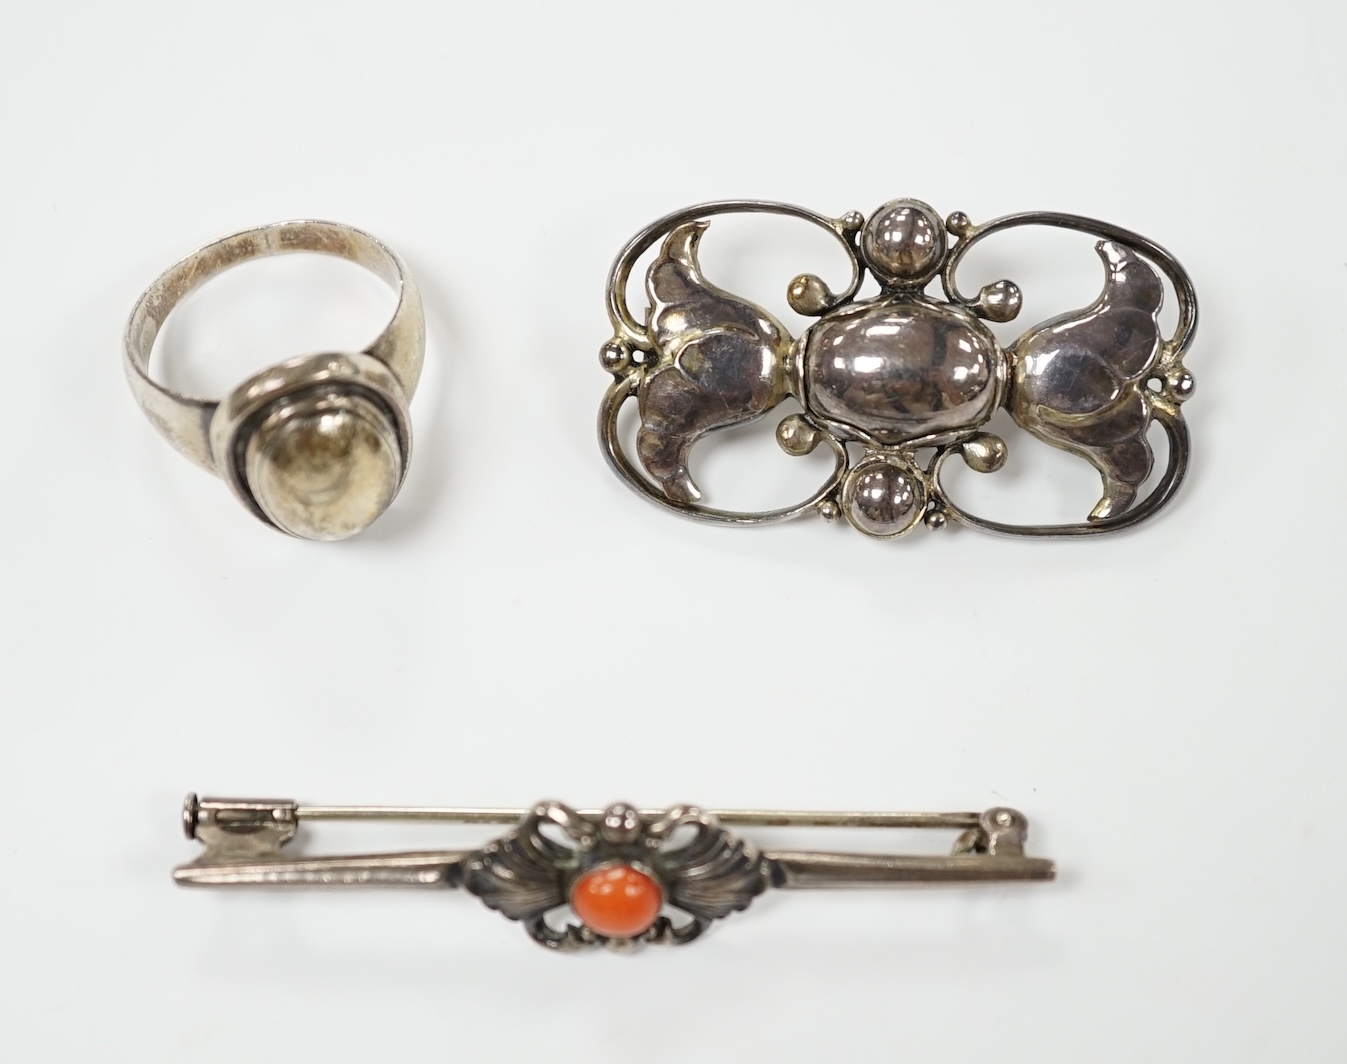 A Georg Jensen sterling and cabochon coral set bar brooch, design no. 214, 53mm, a similar Jensen brooch, design no. 236A, 37mm and a similar ring, design no. 46B, size M. Condition - fair to good